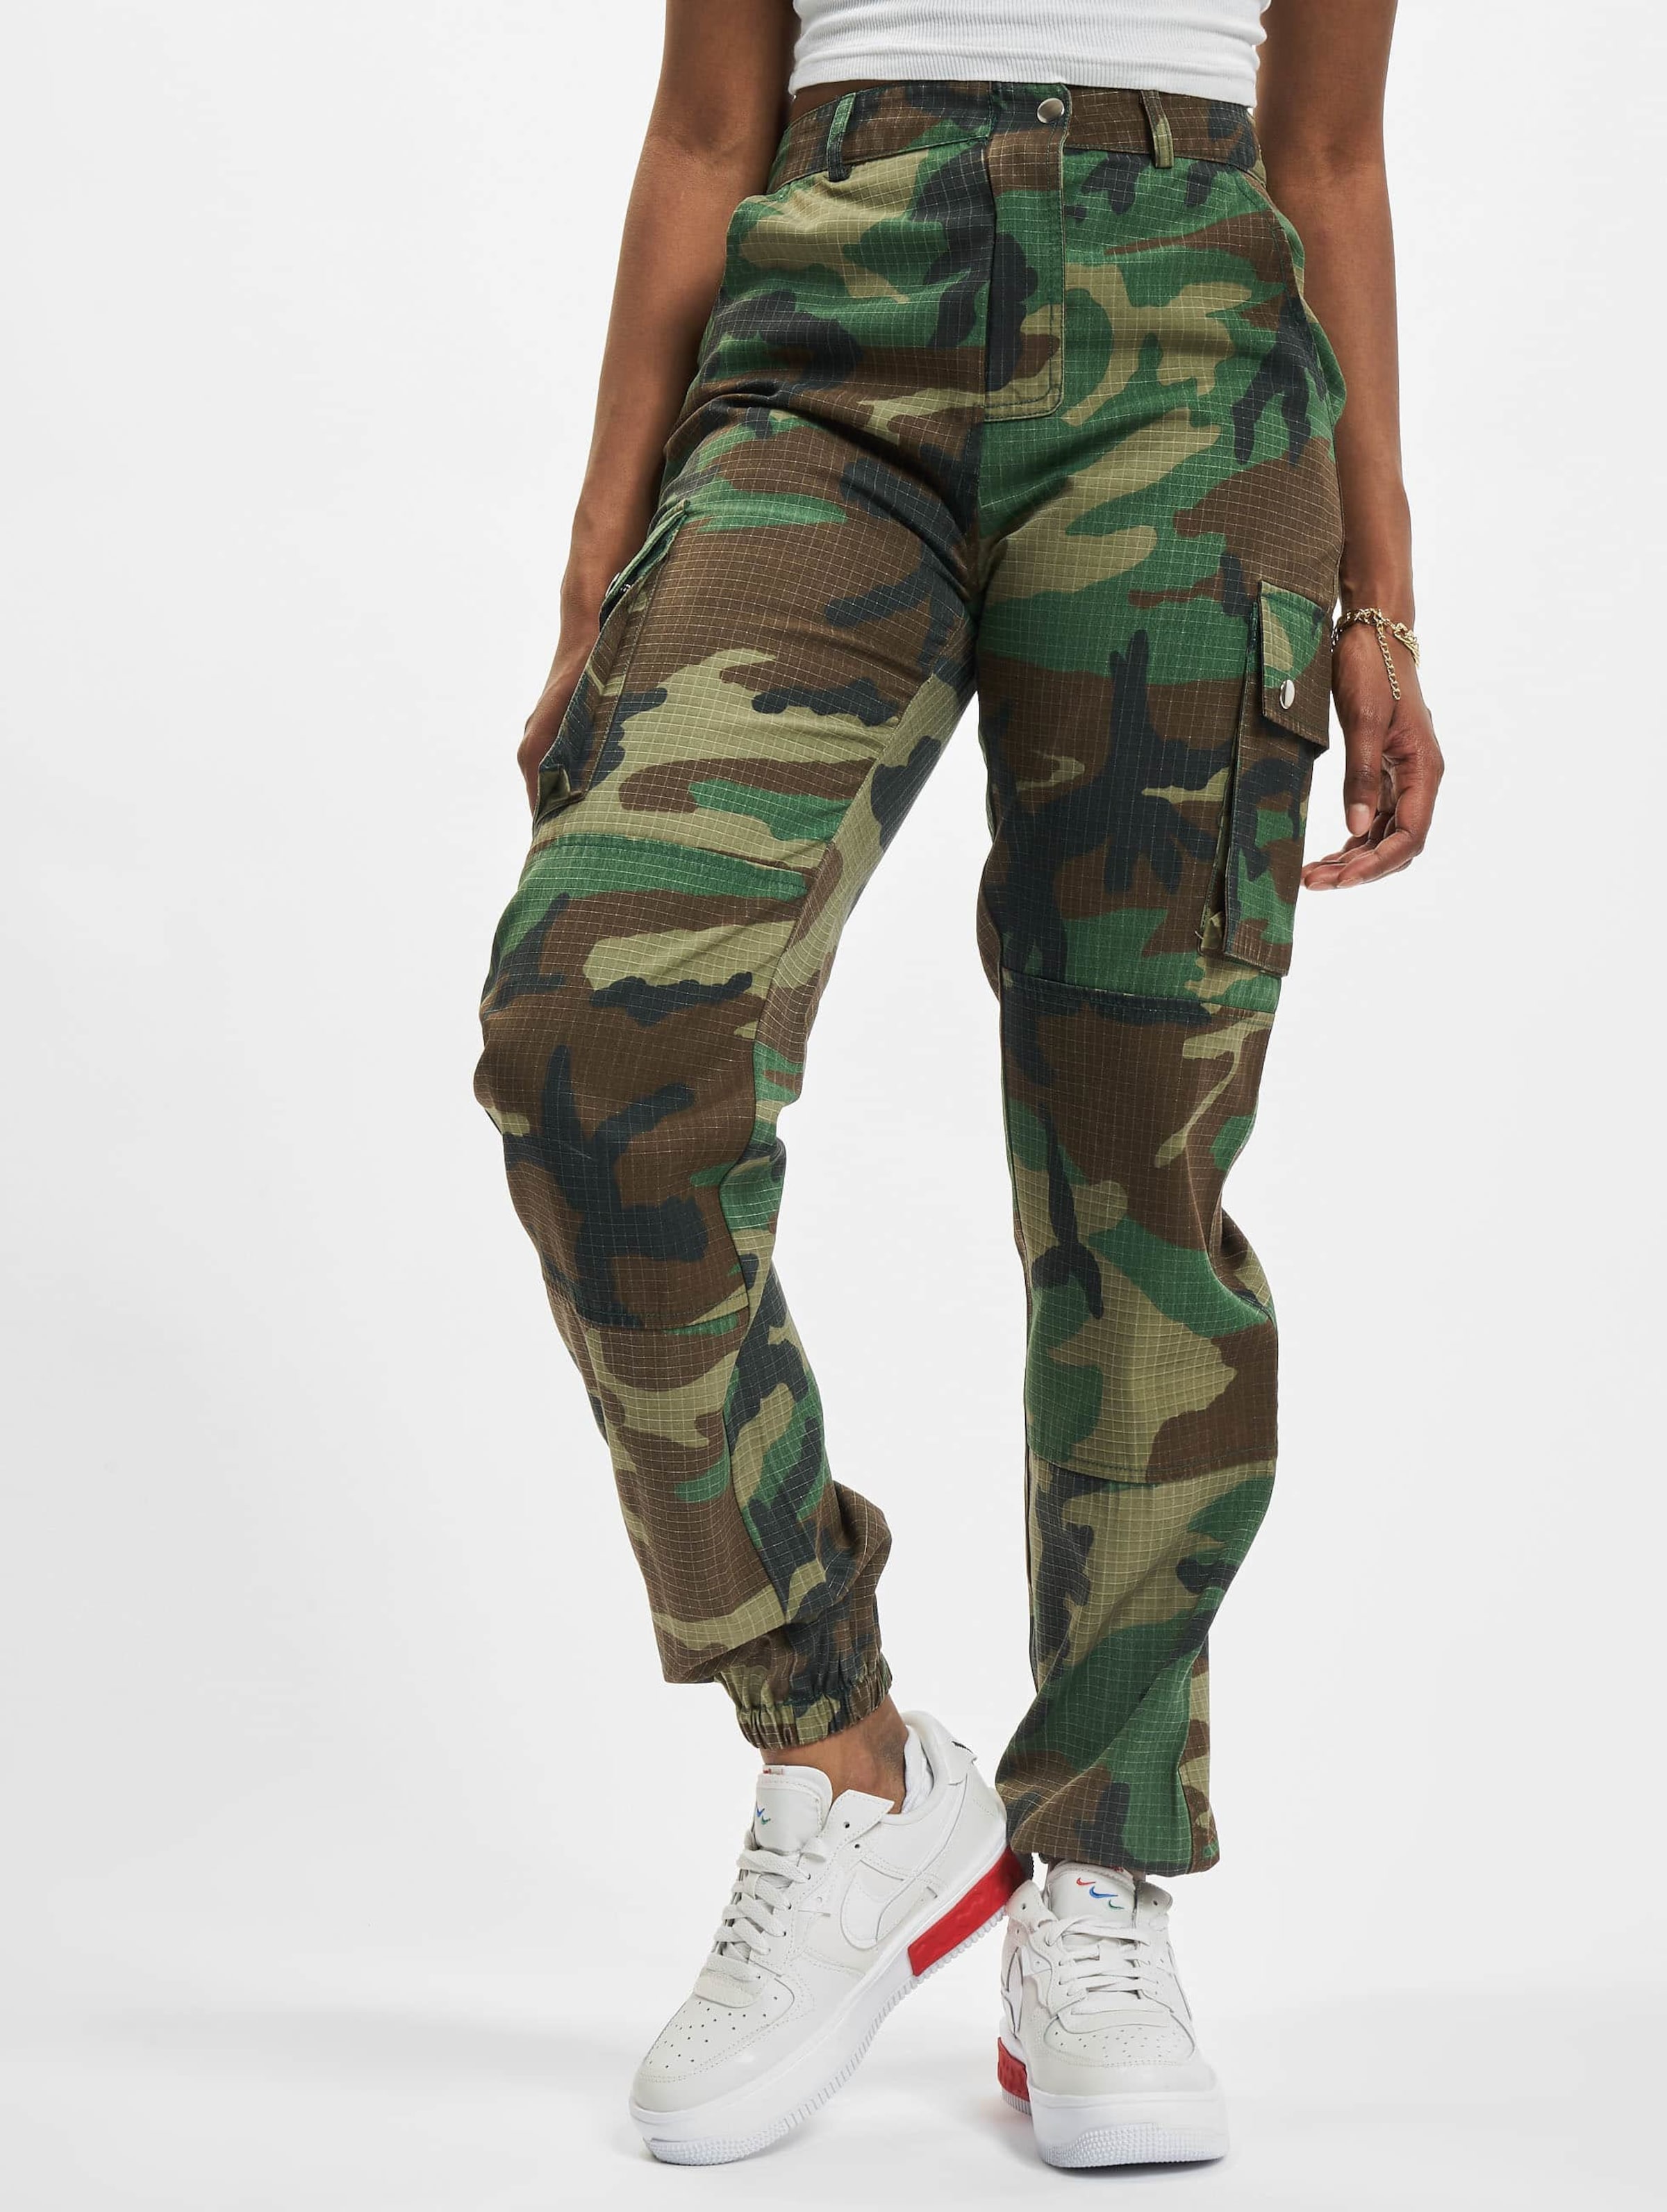 Camo Print Metal Grommet Belted Cargo Pants | Leggings are not pants,  Belted pants, Pants for women